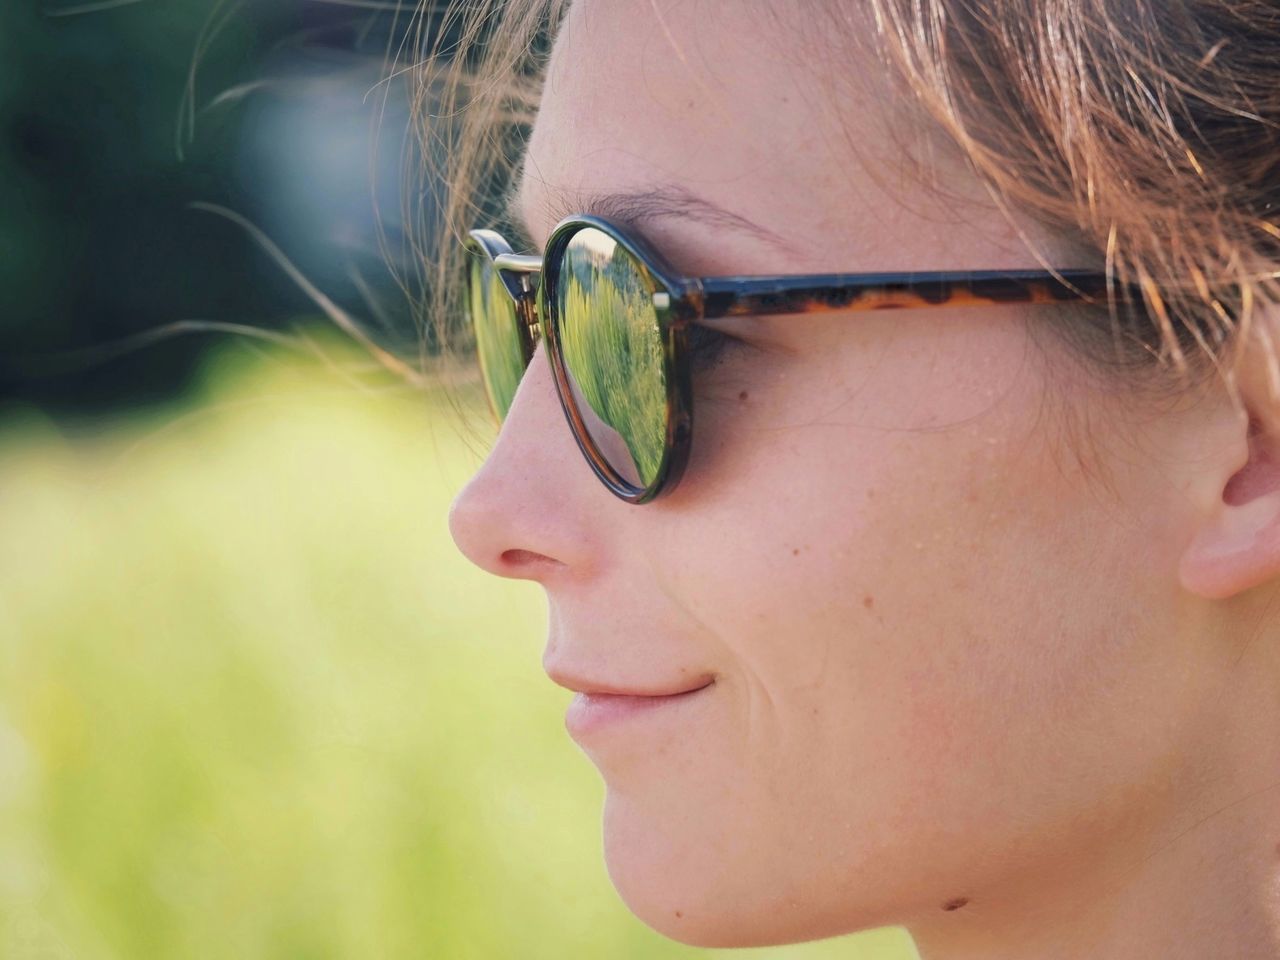 Profile view of young woman wearing sunglasses